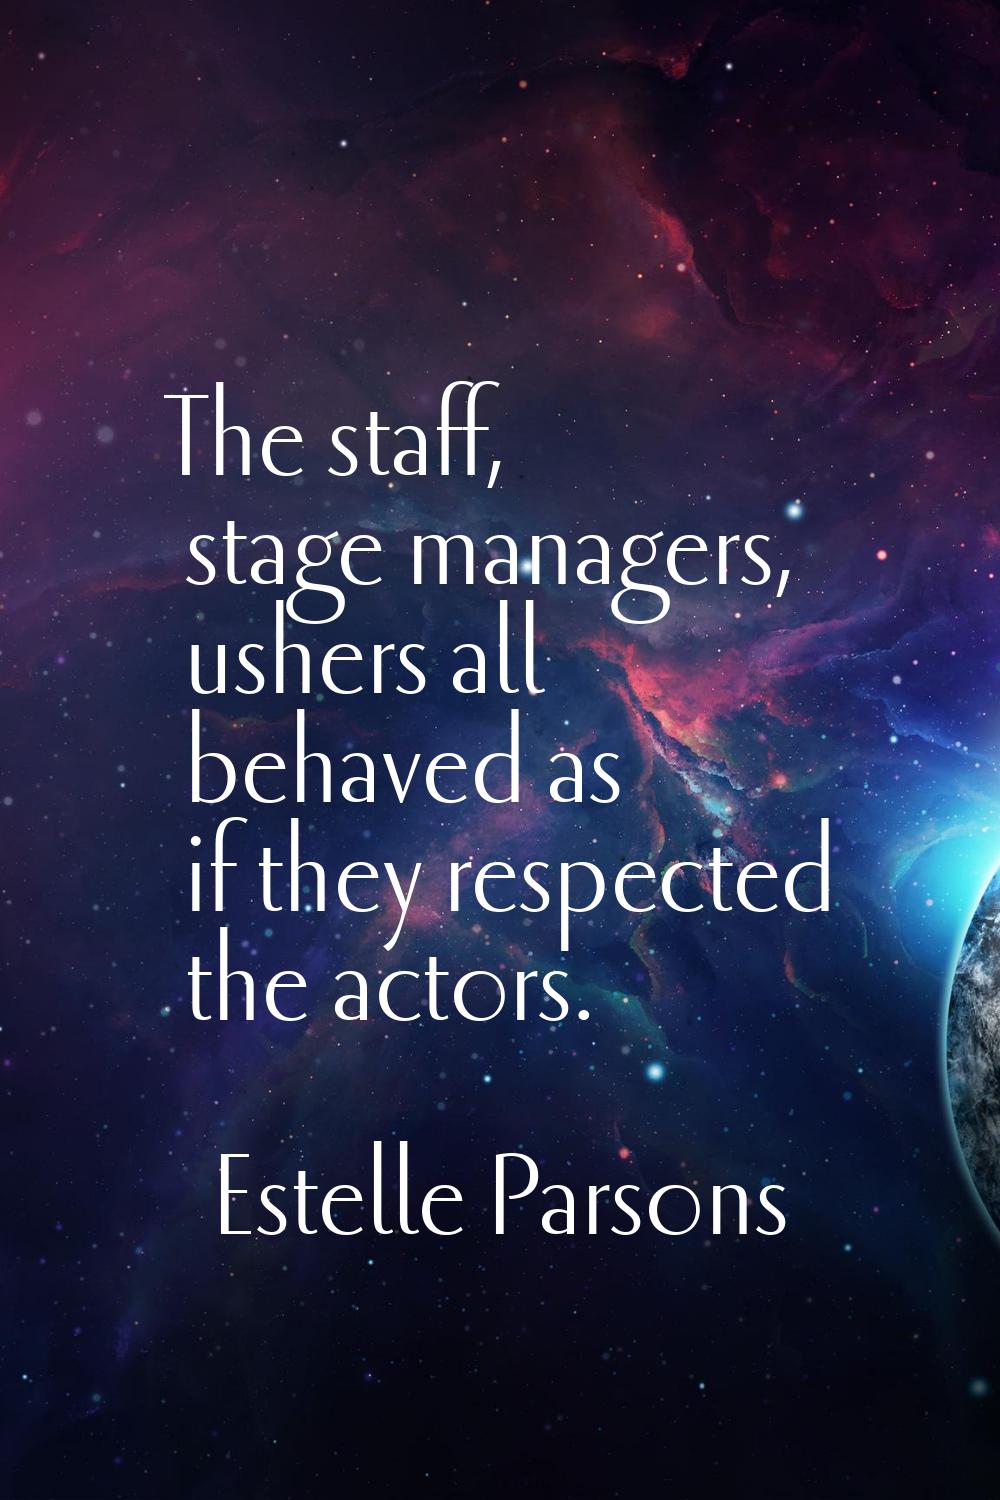 The staff, stage managers, ushers all behaved as if they respected the actors.